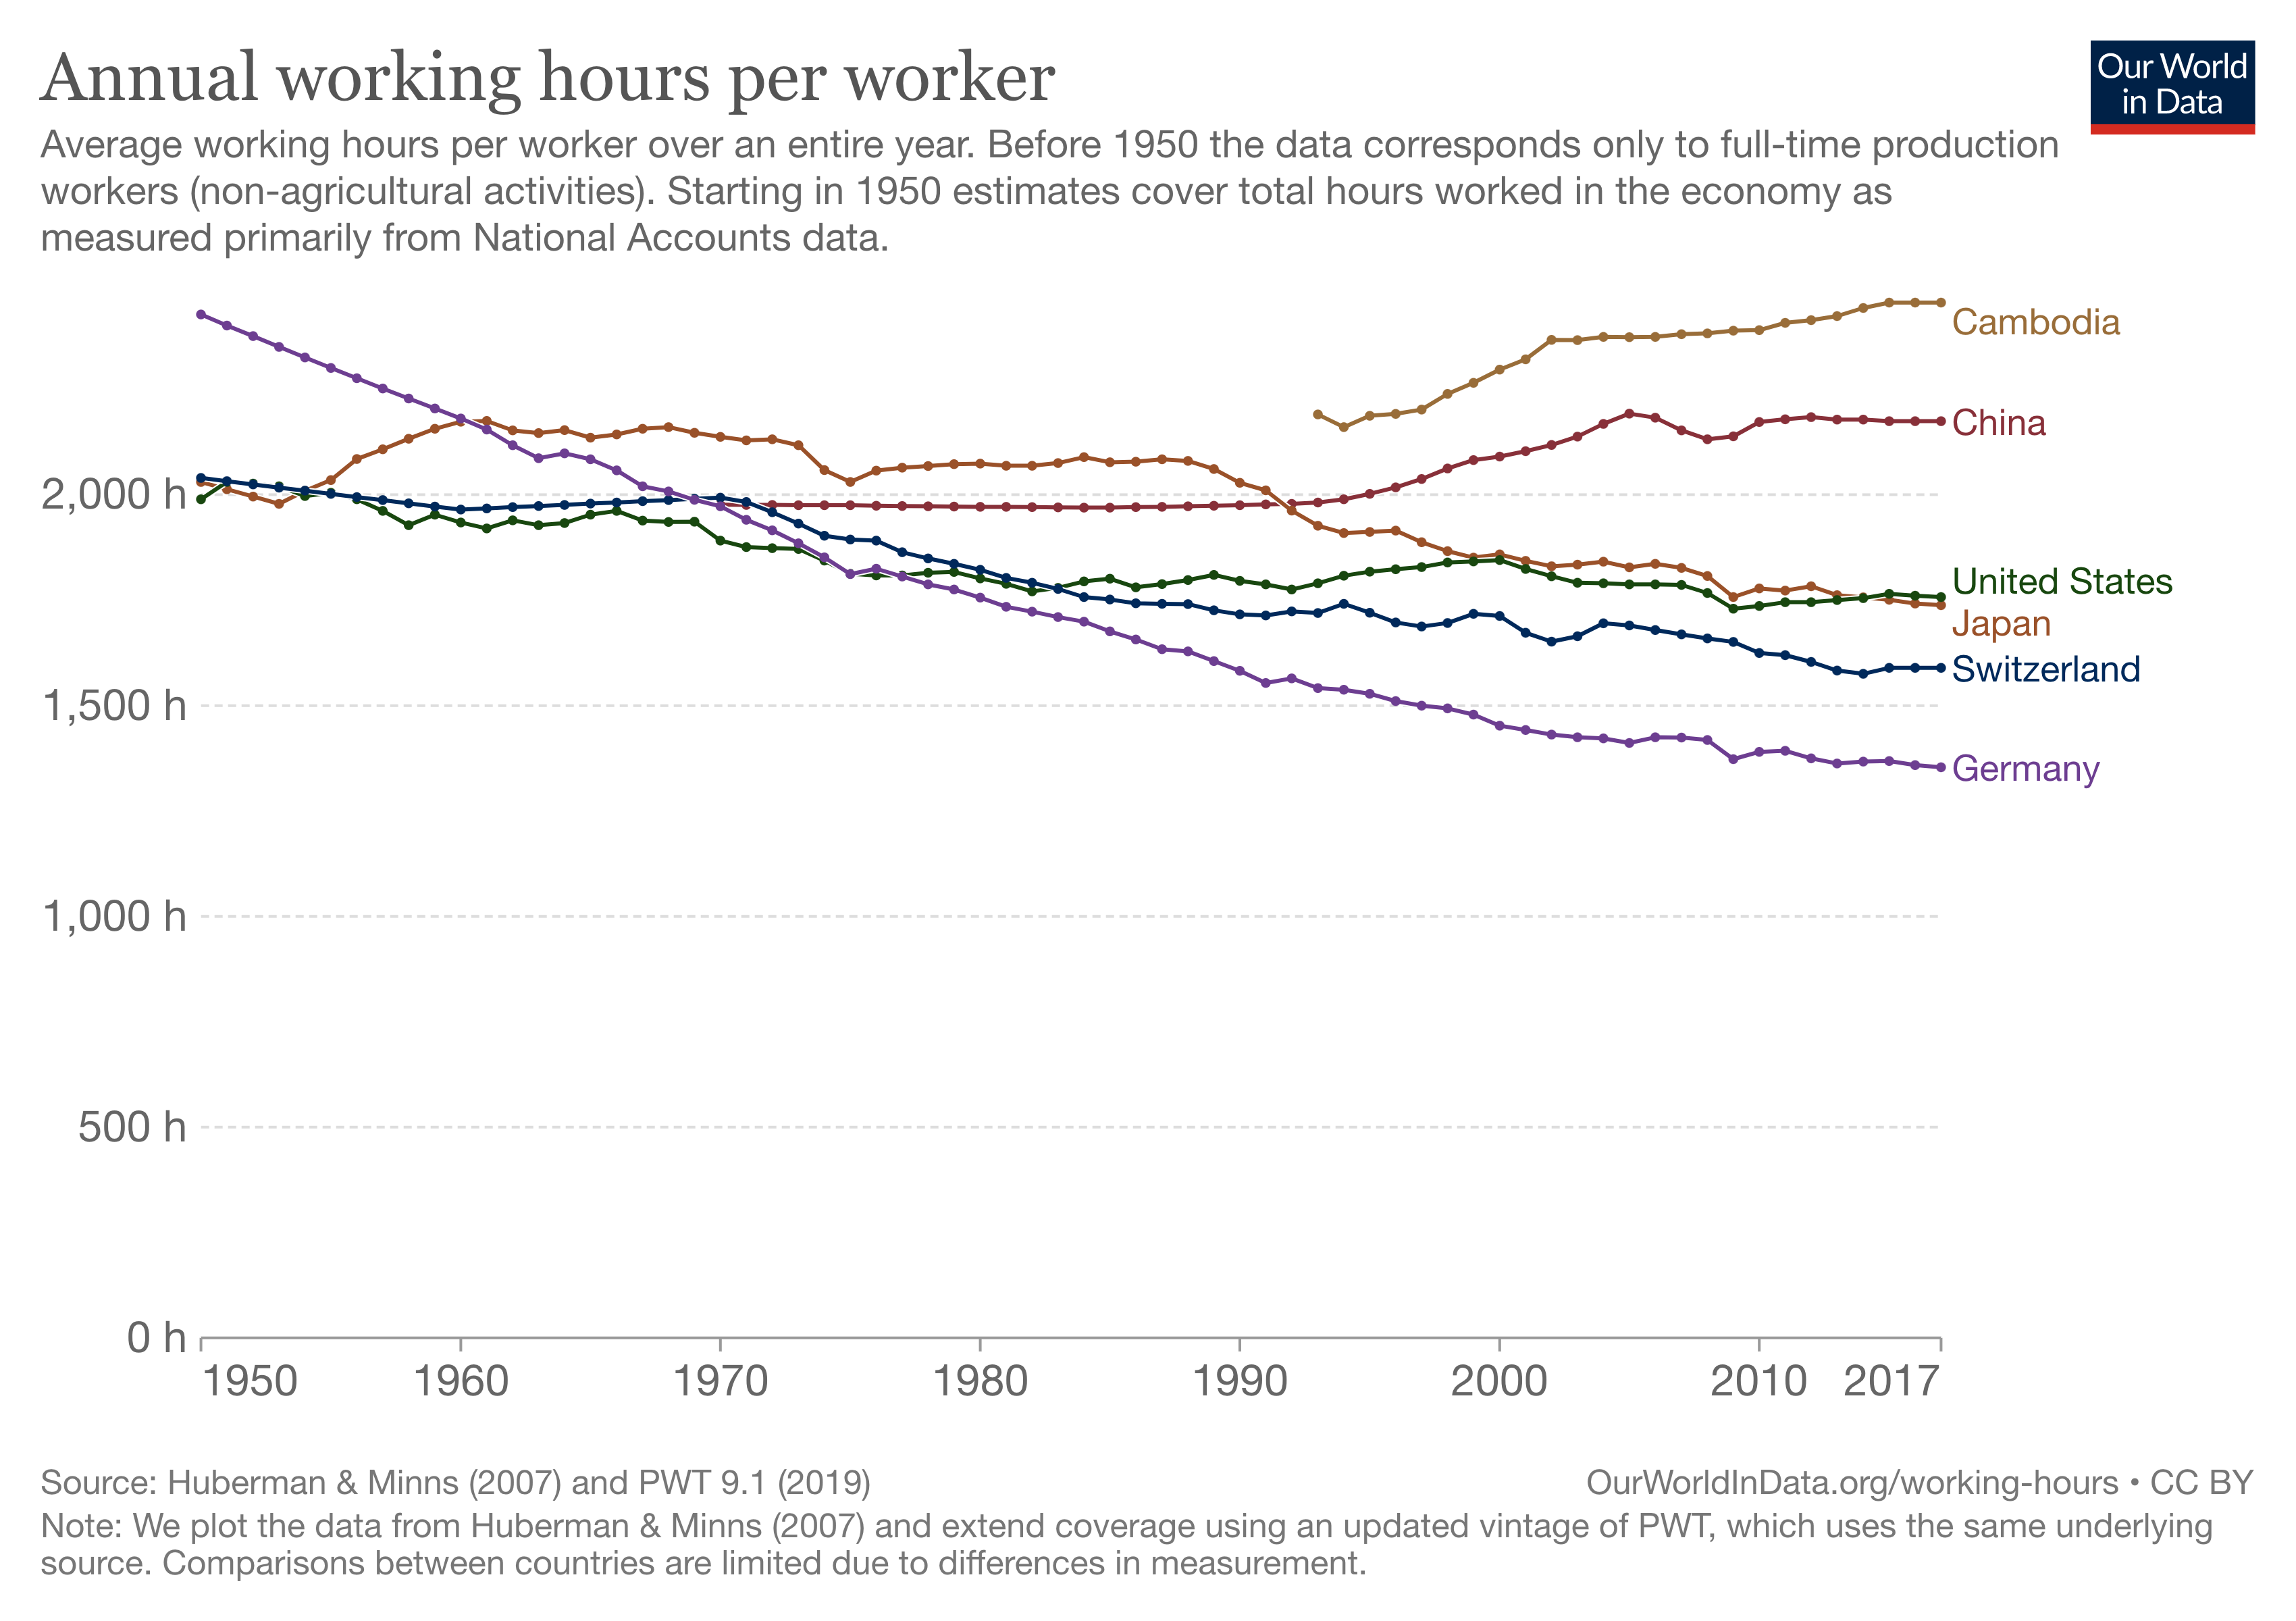 A line graph showing annual working hours per worker from 1950 to 2017.